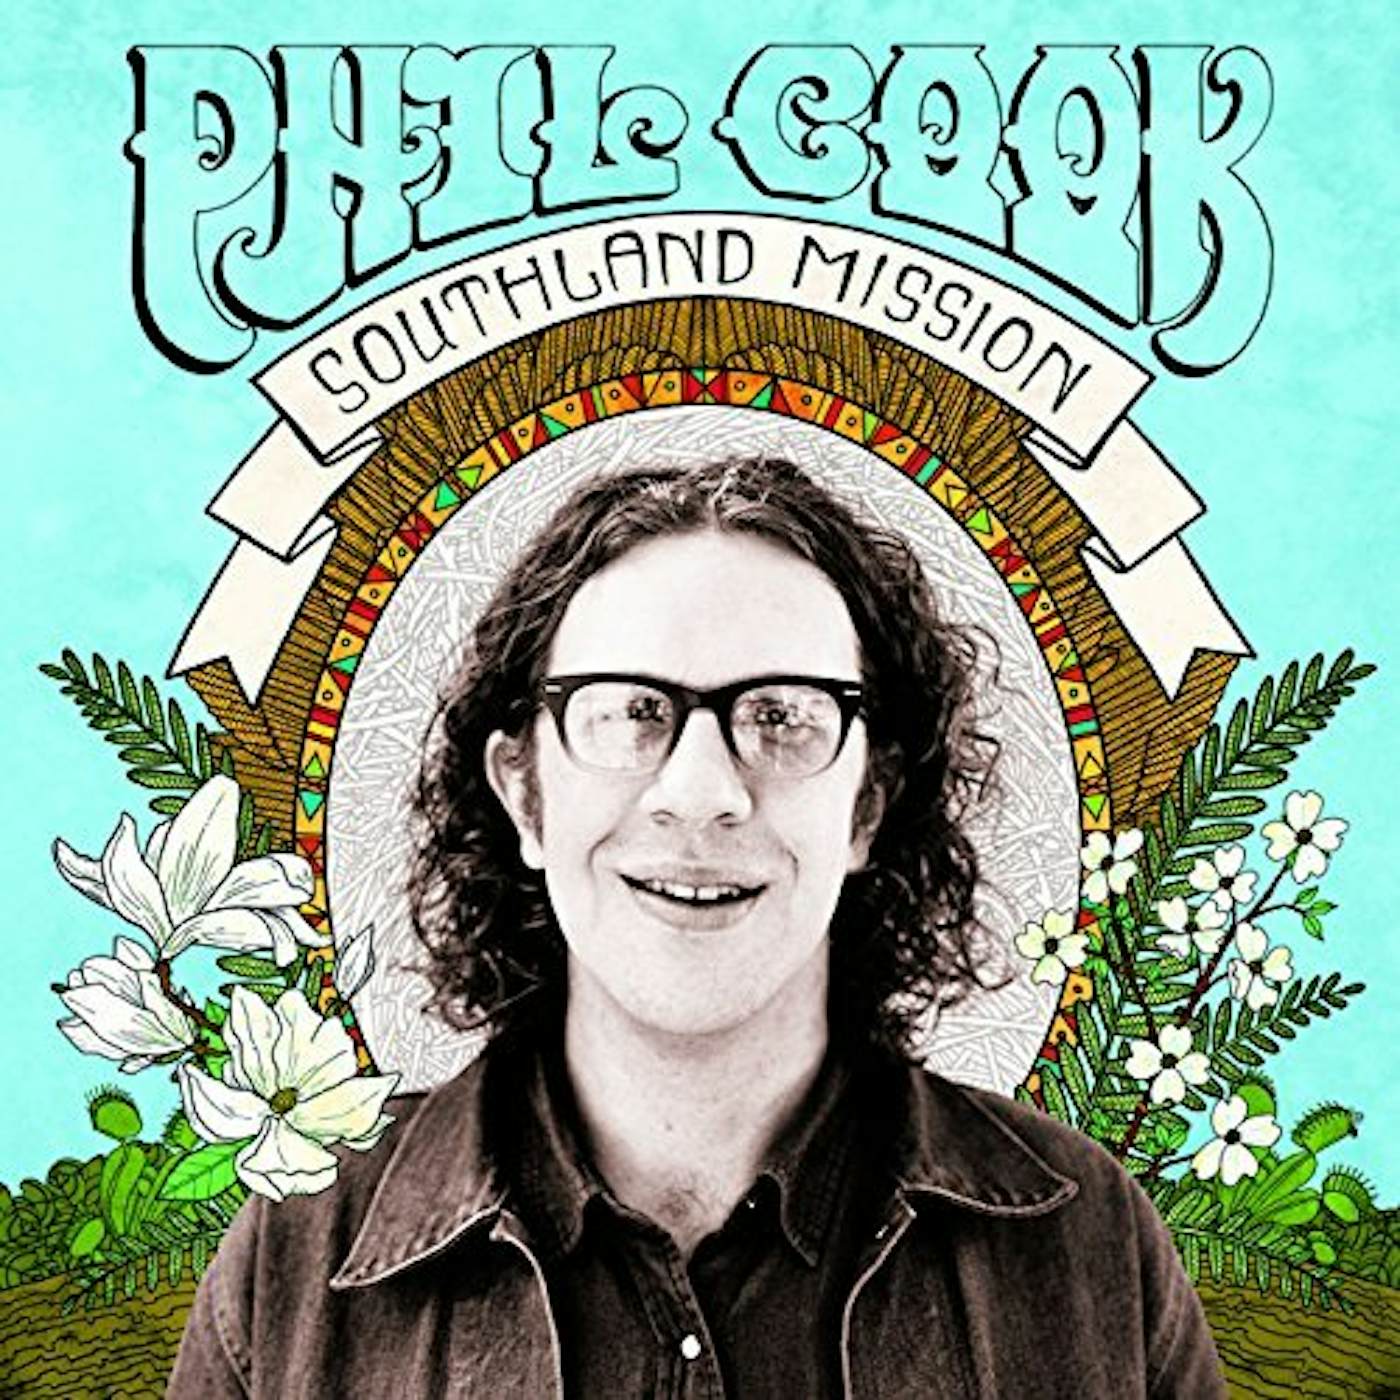 Phil Cook SOUTHLAND MISSION CD